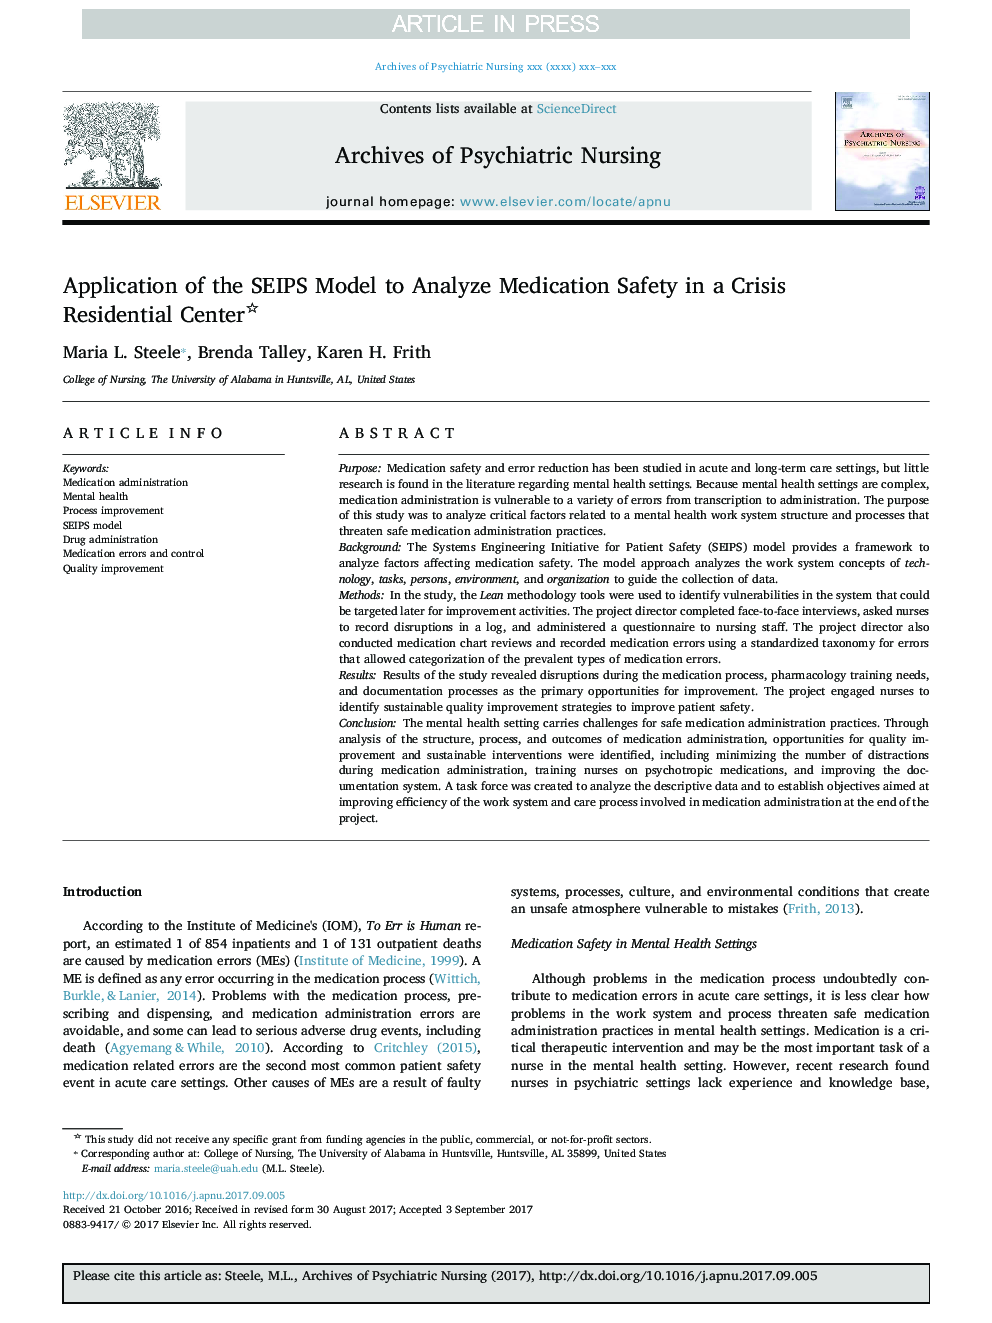 Application of the SEIPS Model to Analyze Medication Safety in a Crisis Residential Center